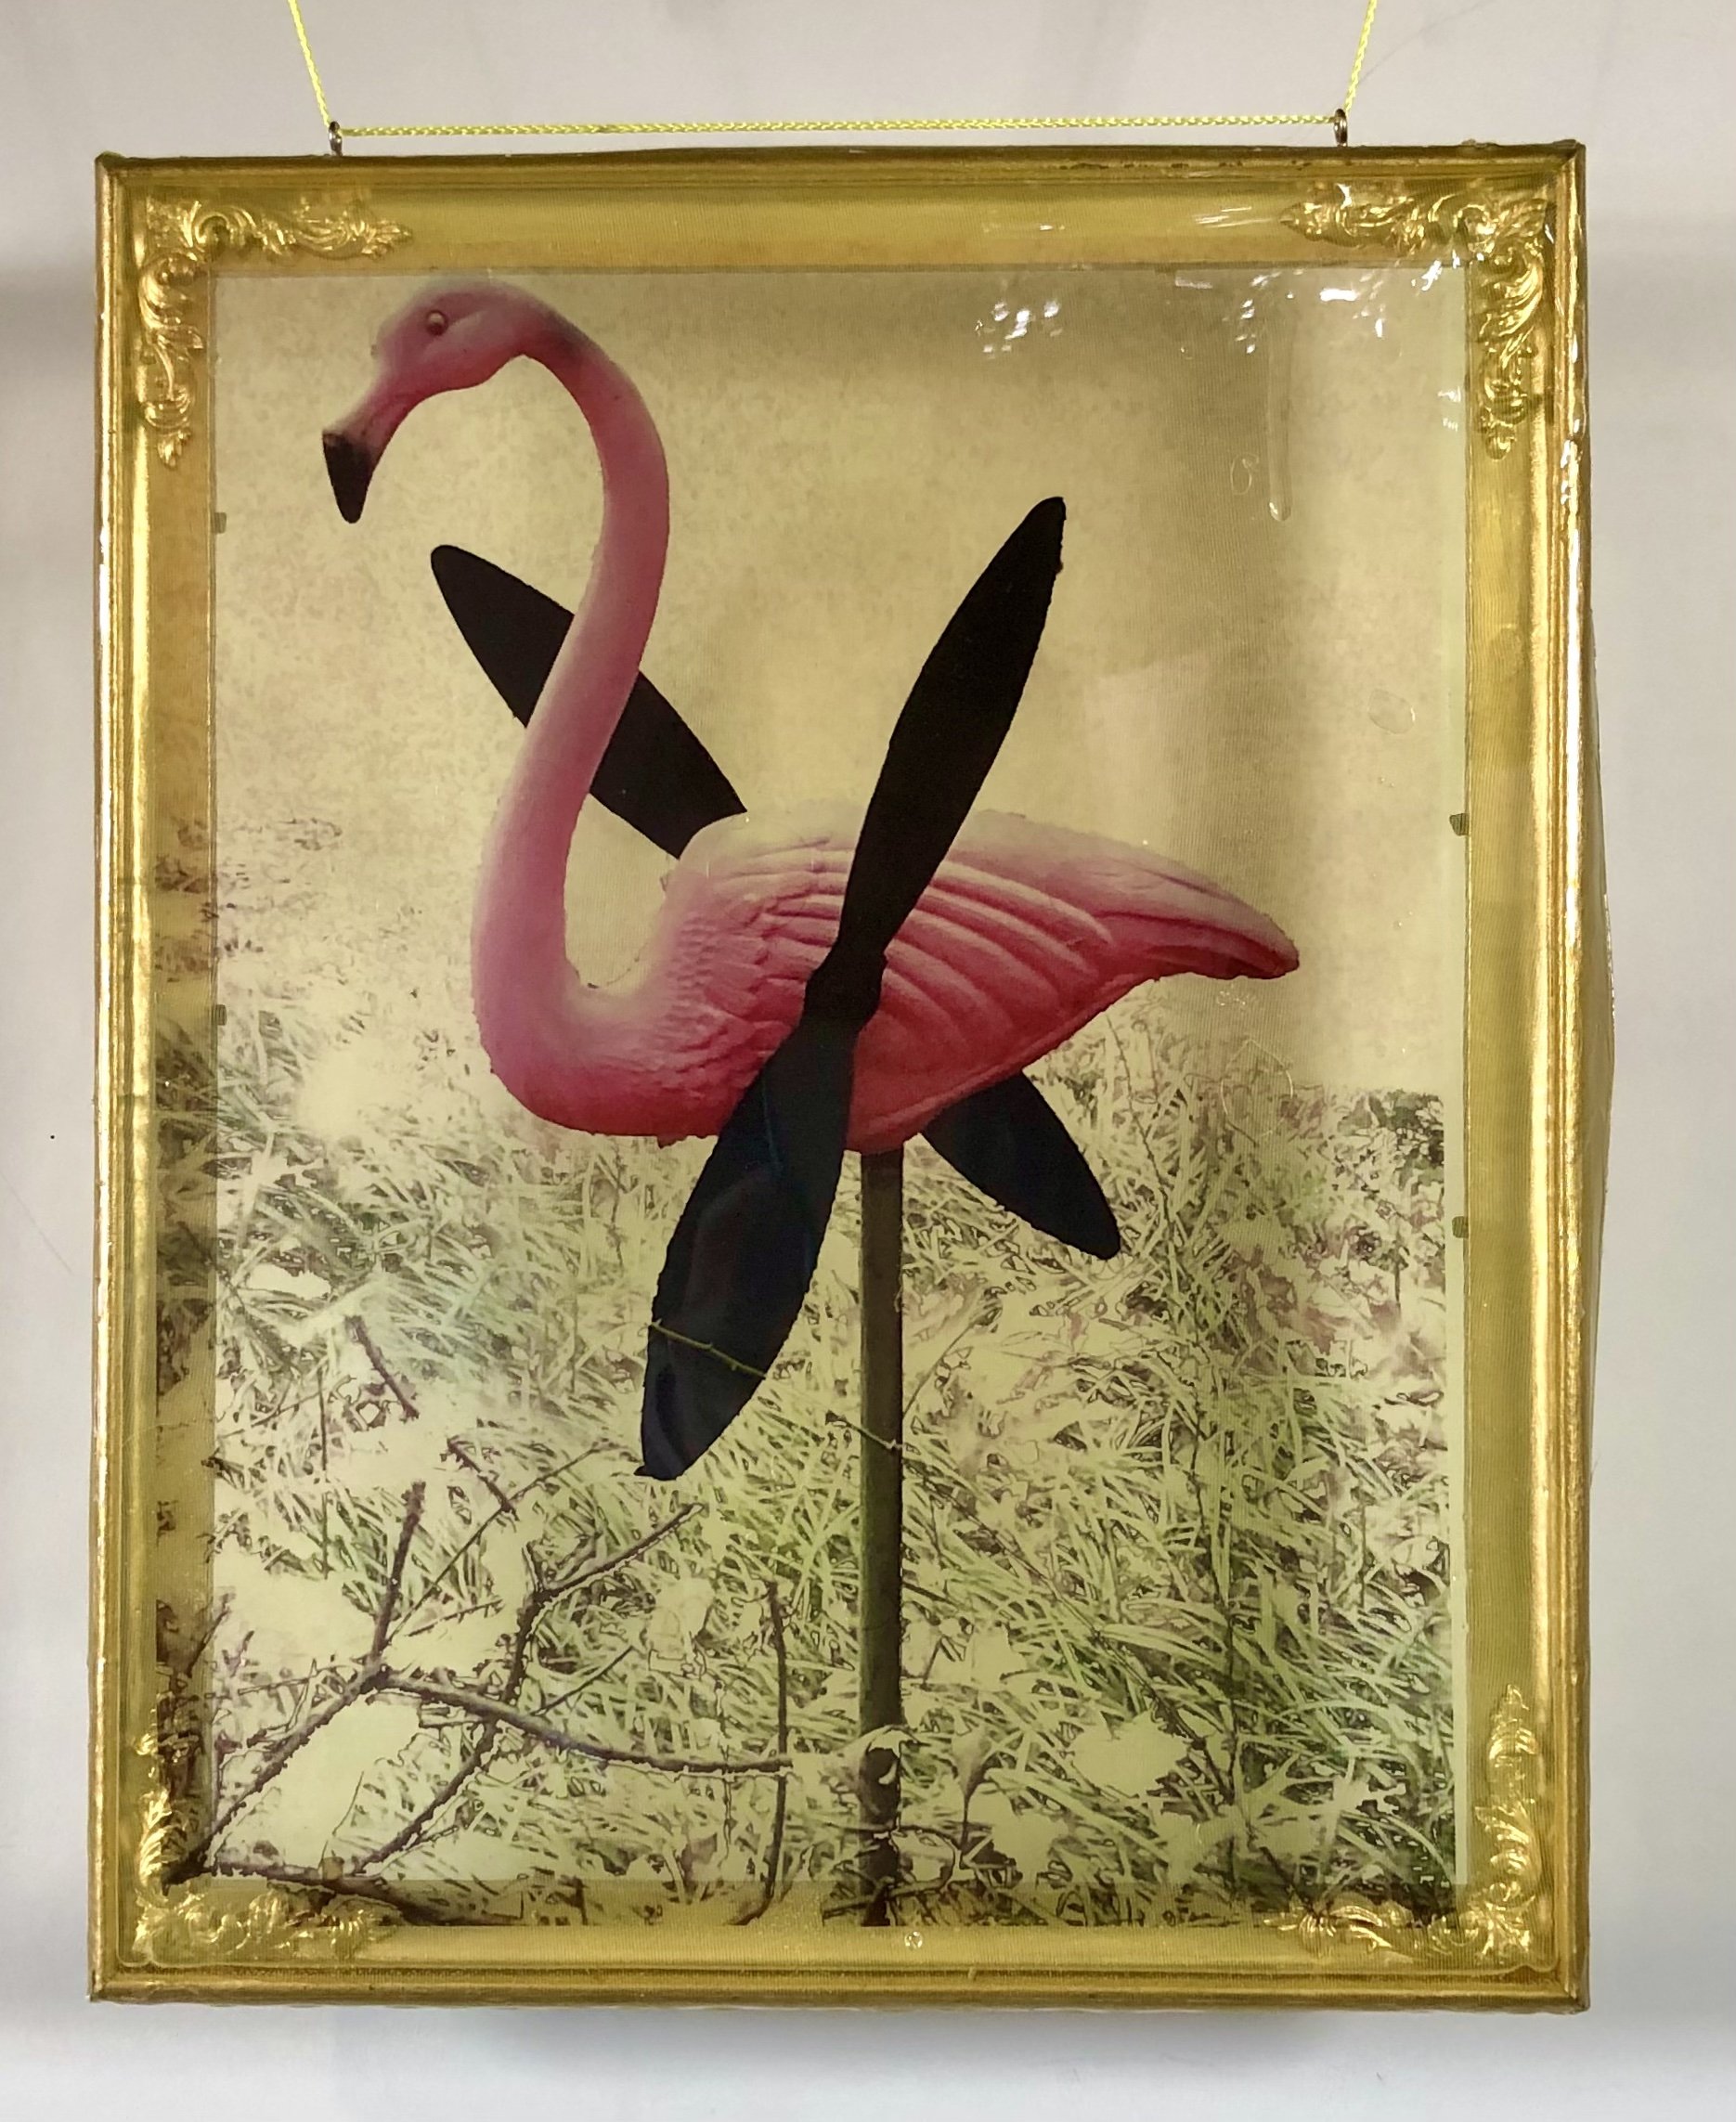    This Flamingo Garden Stake lived at my grandparents house in Diamond Hill. When they passed, it flew all the way to Meadowbrook.   ~ Stephanie Watson  